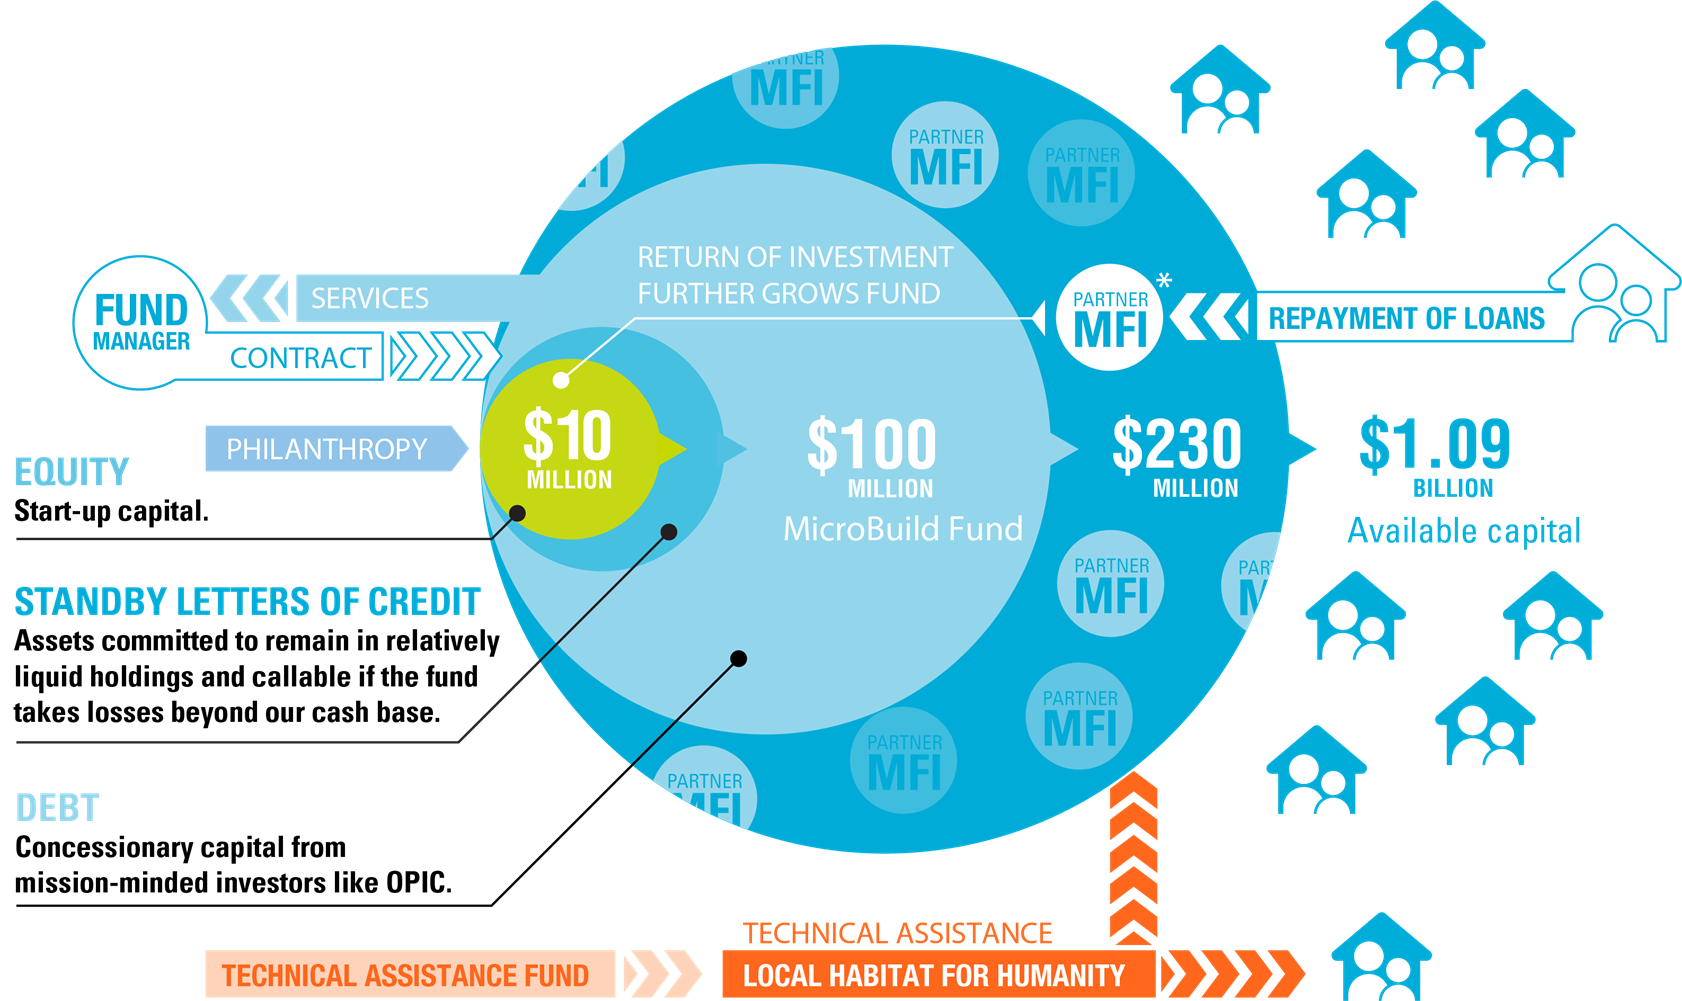 graphic illustrating how the Microbuild Fund concept works to invest equity and grow it into more available capital